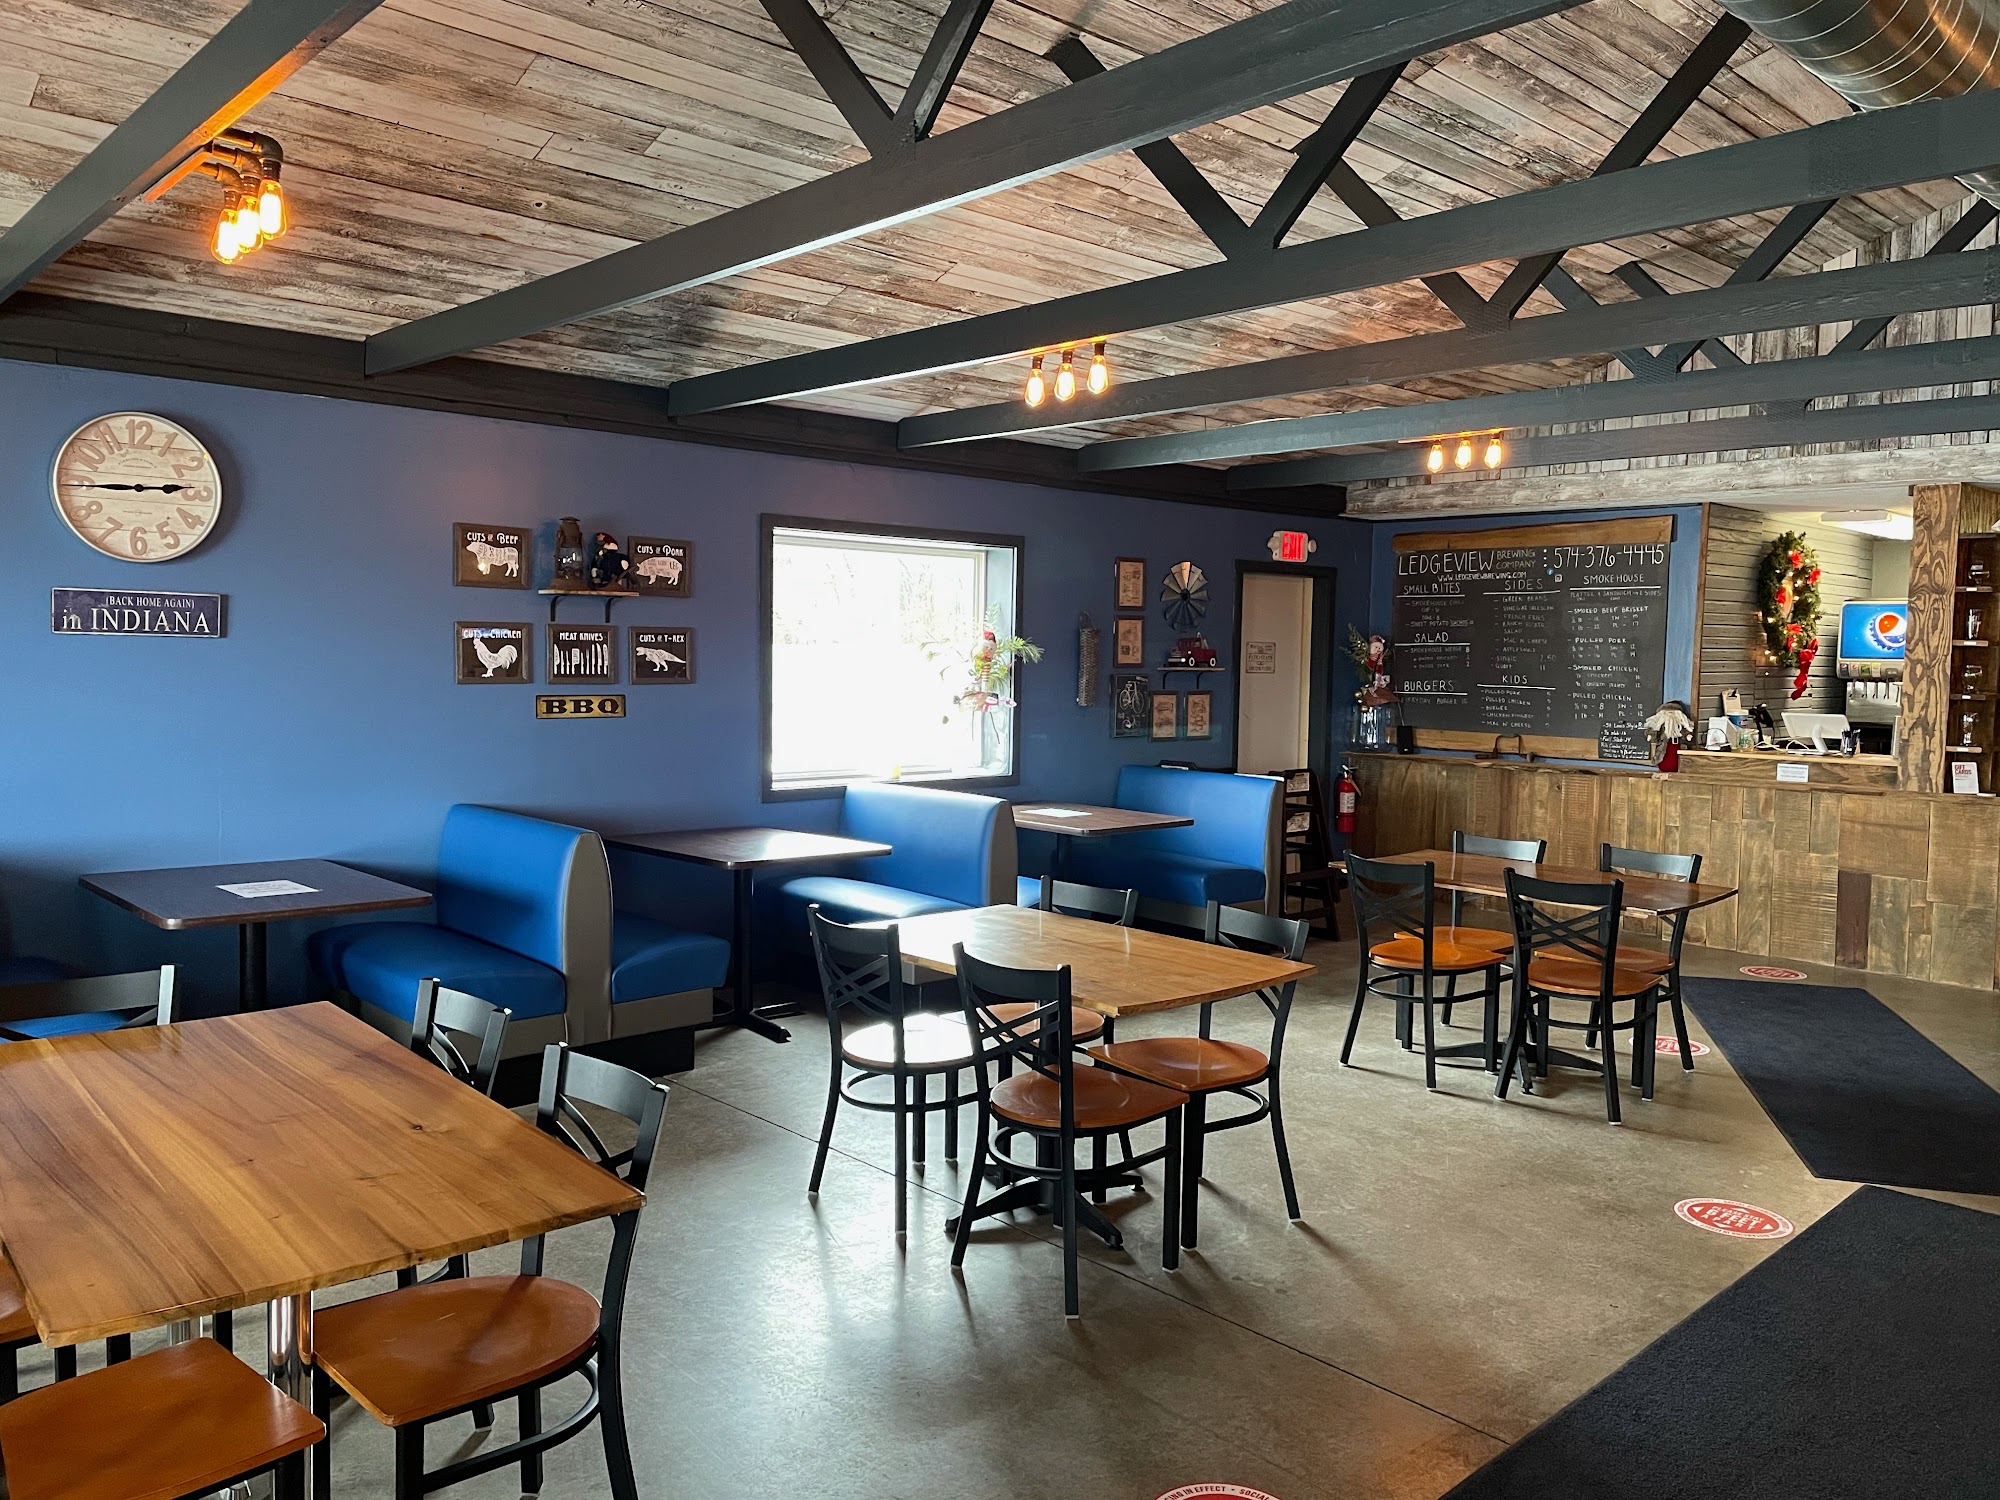 Ledgeview Brewing Company and BBQ Restaurant